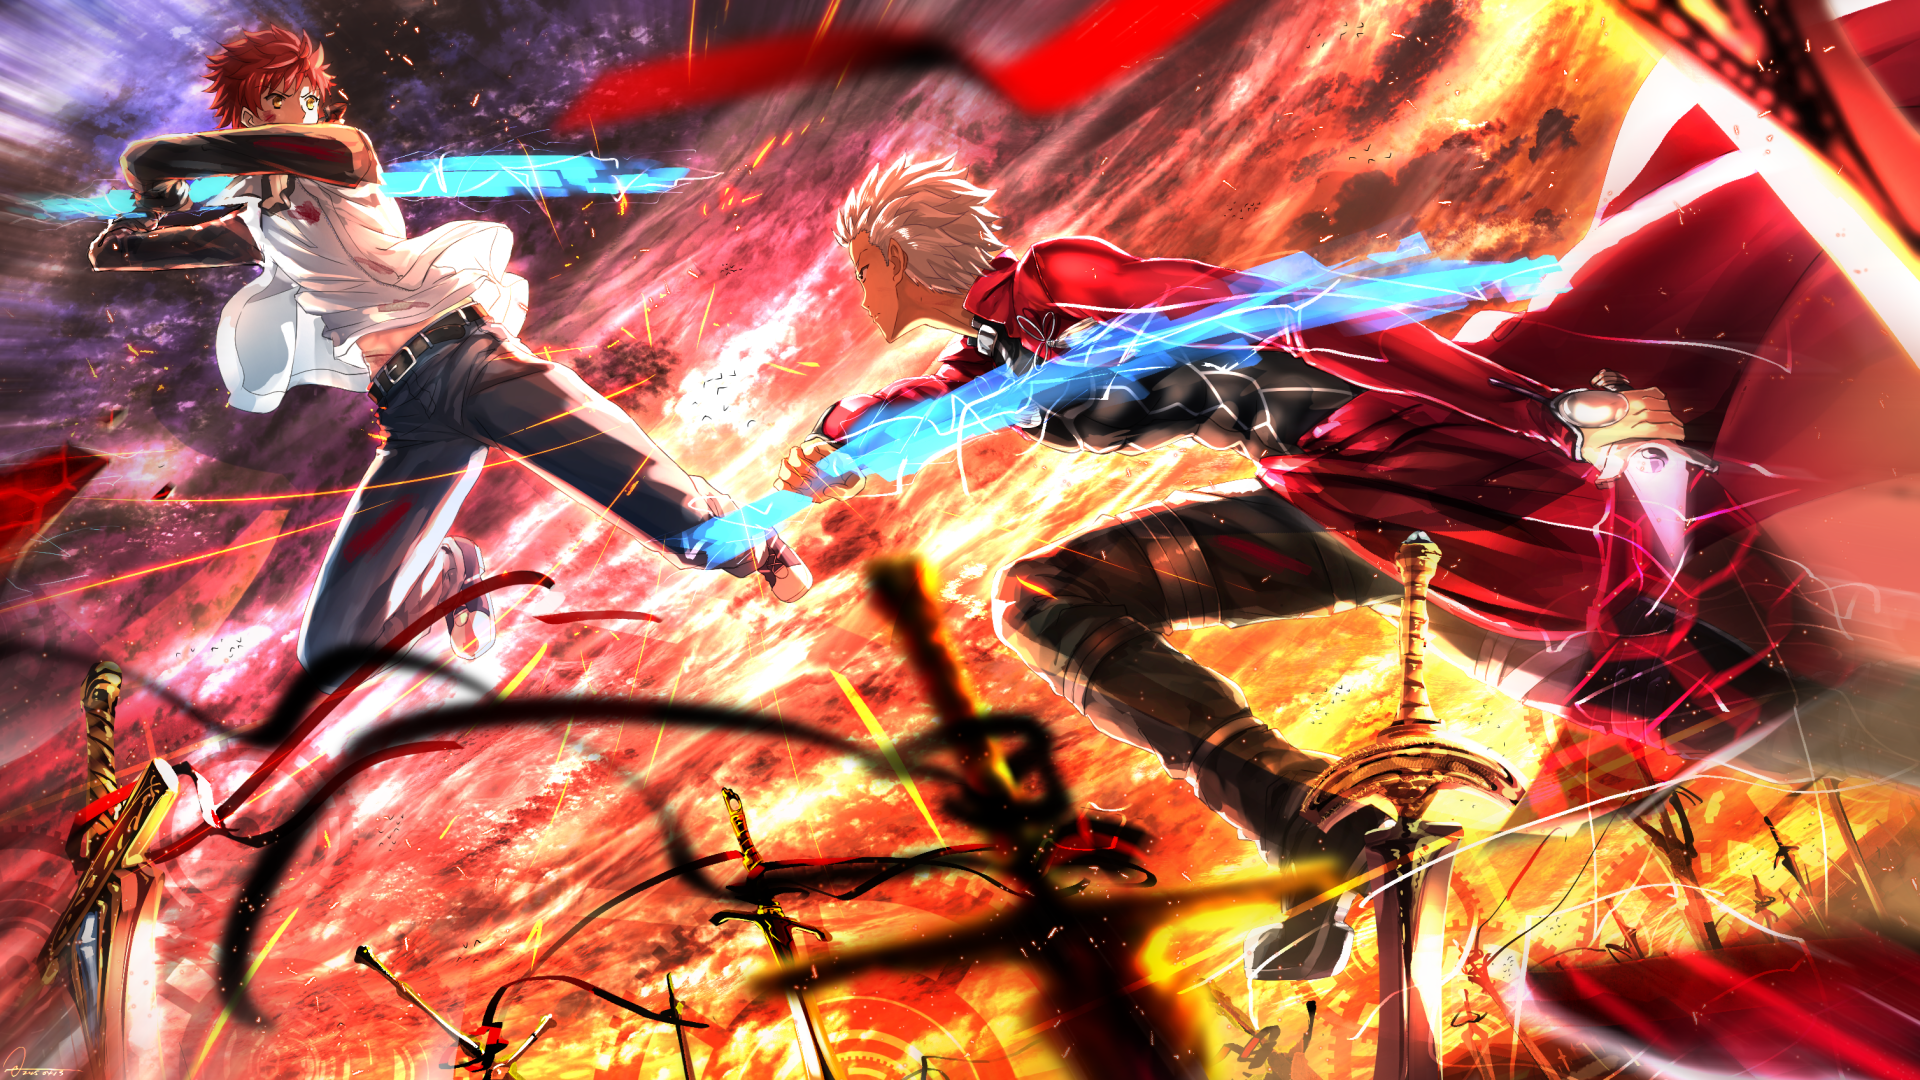 145 Archer Fate Stay Night Hd Wallpapers Background Images Wallpaper Abyss